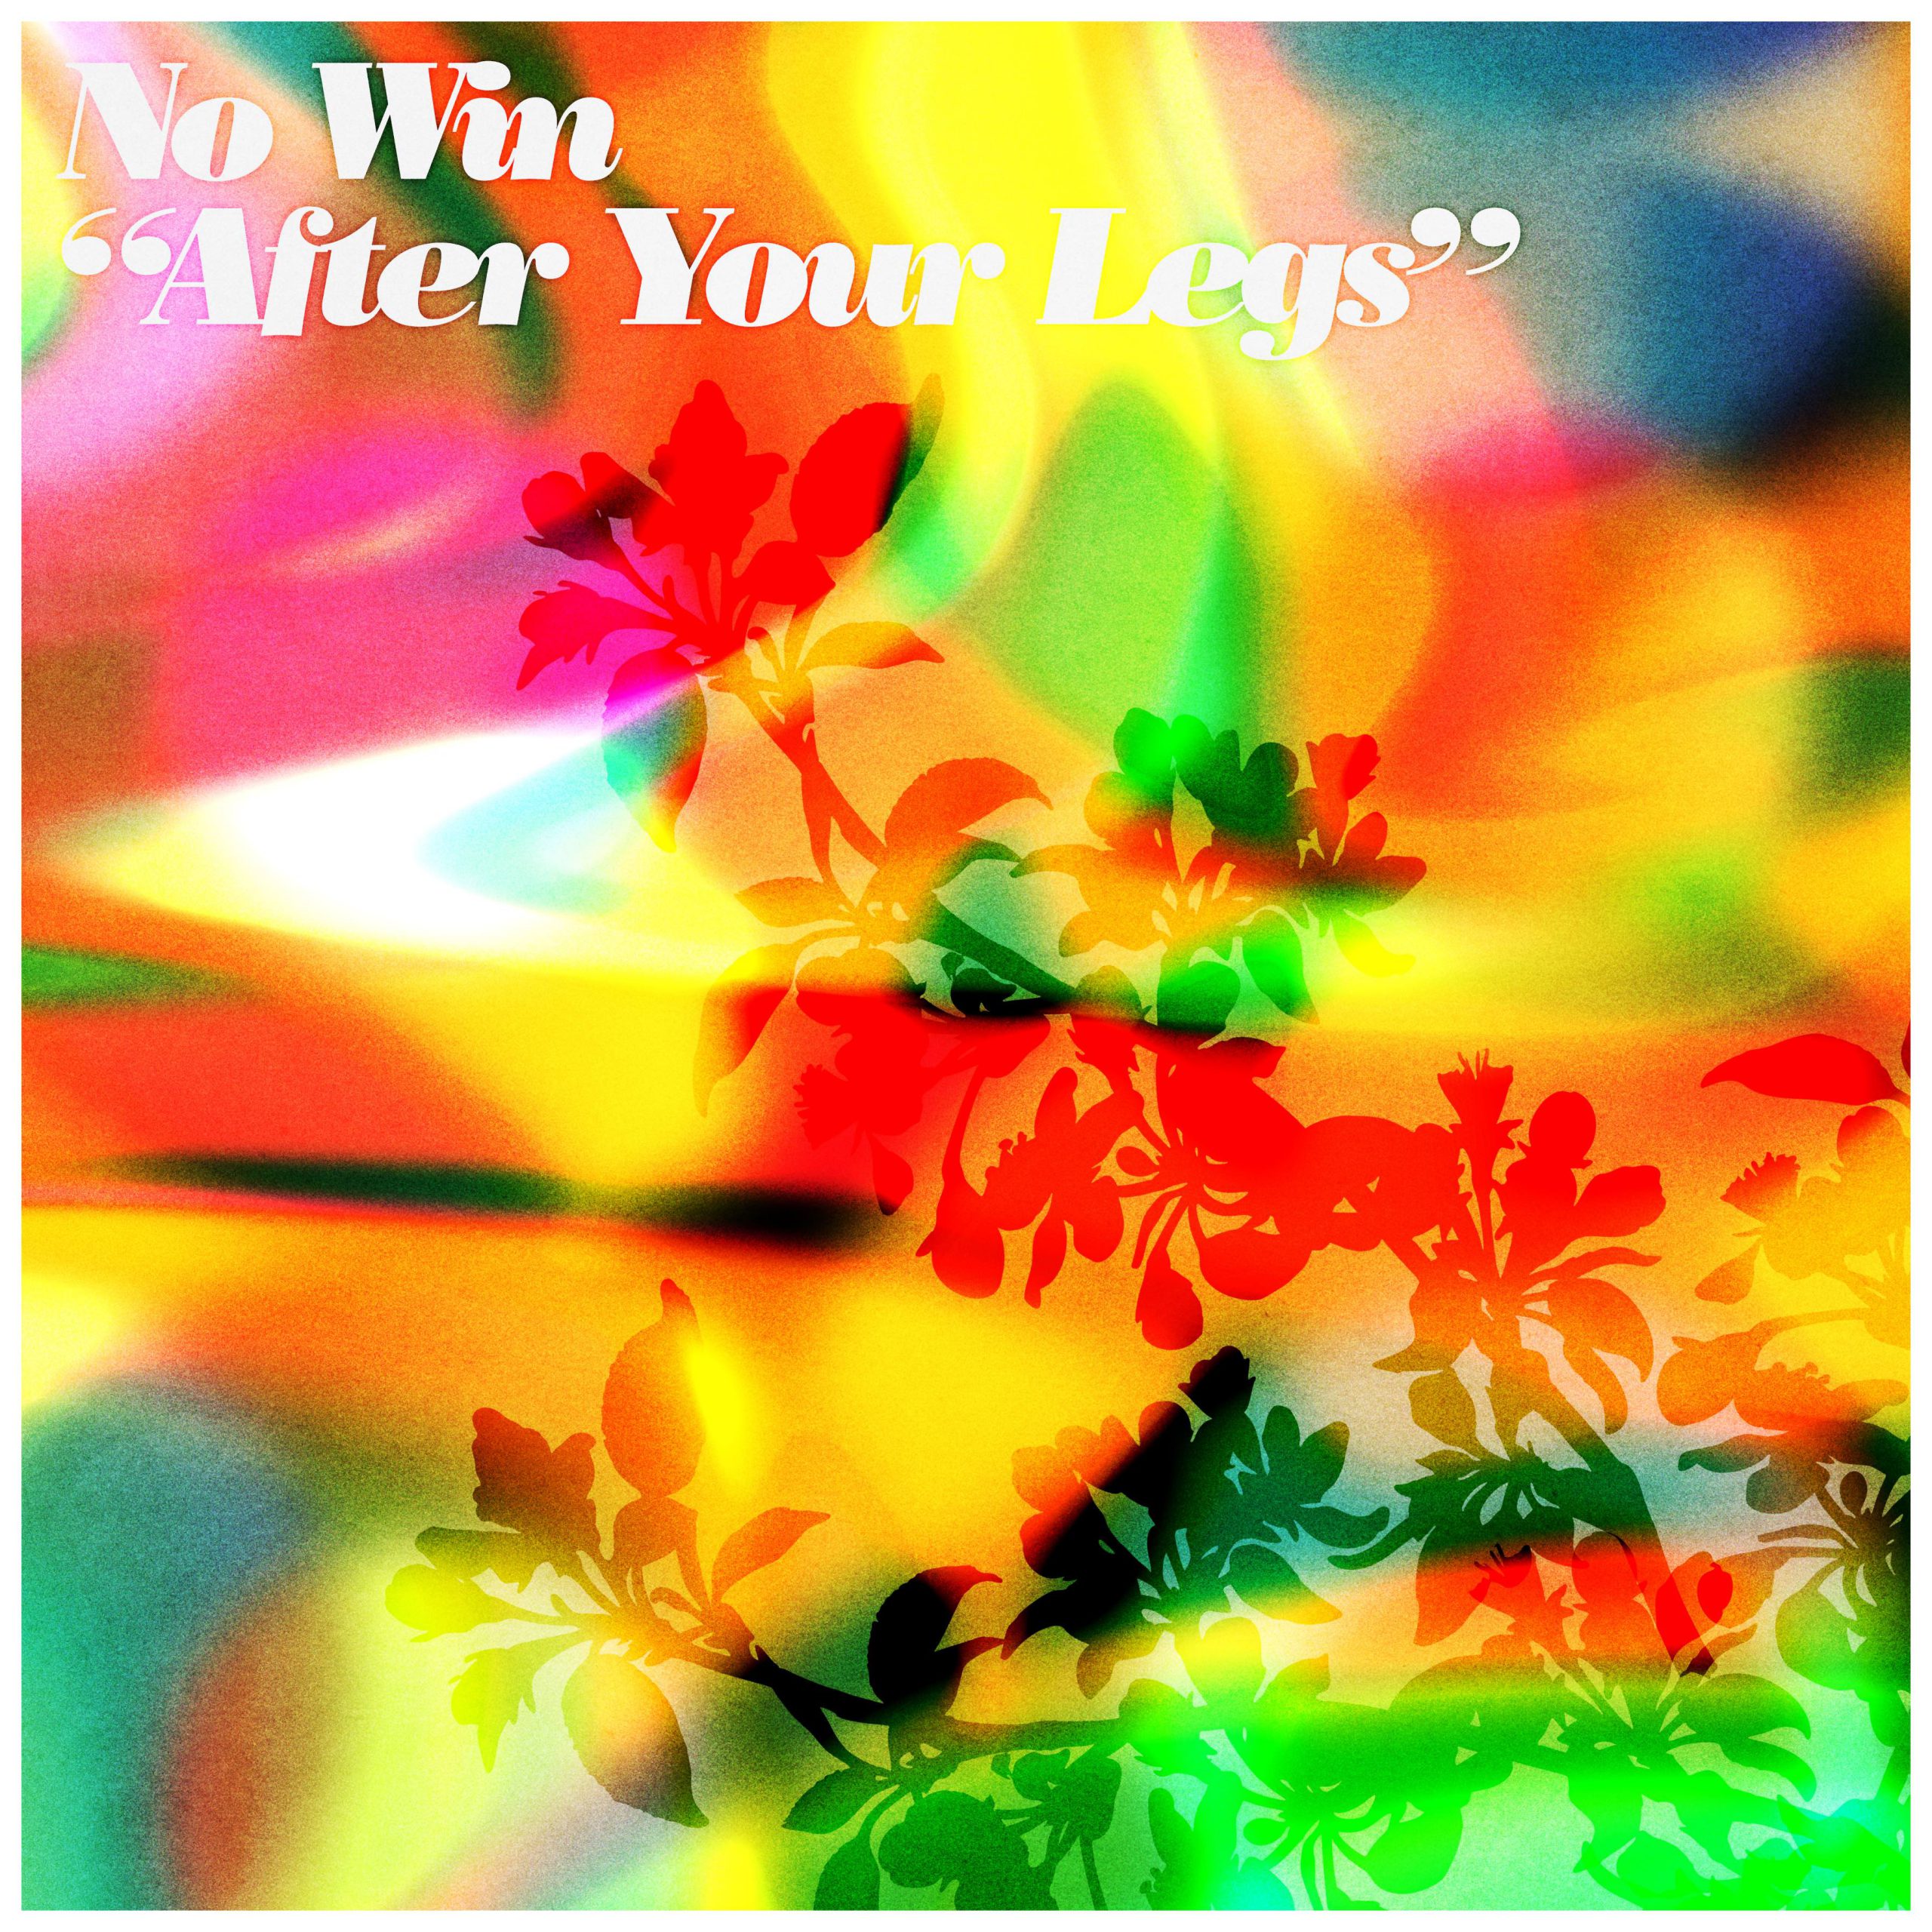 After Your Legs (Alternate Version) – Single